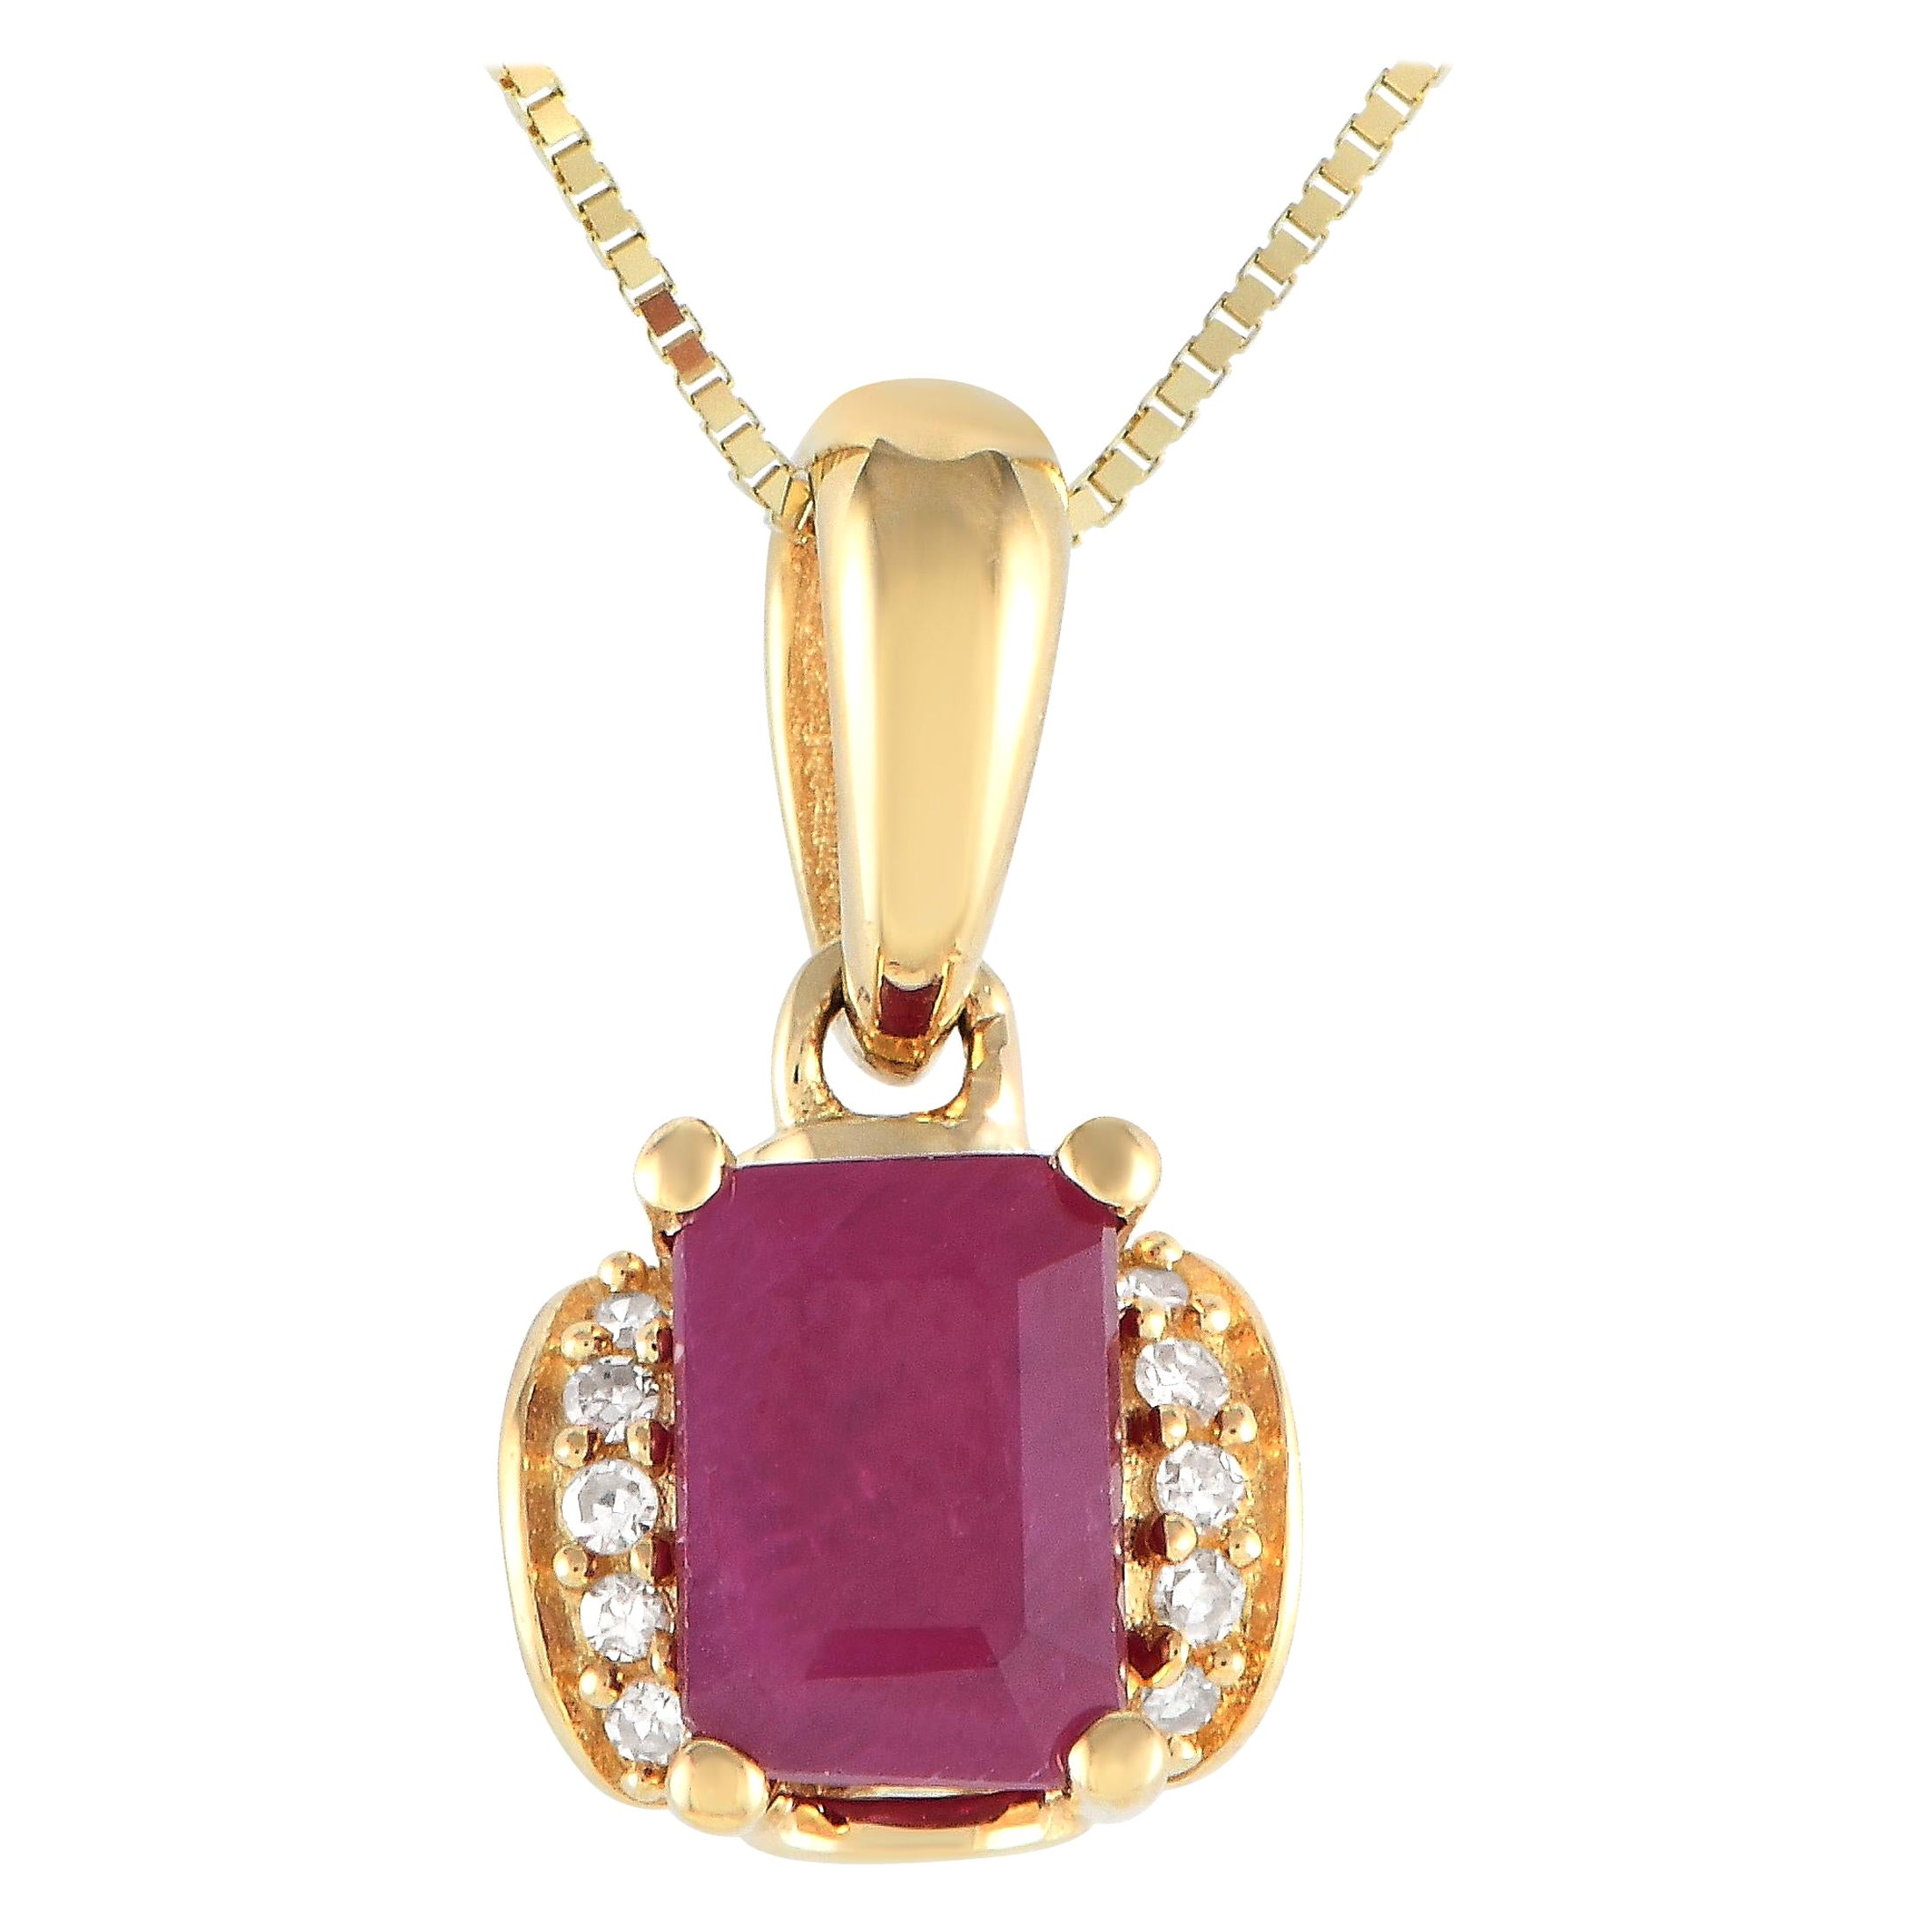 LB Exclusive 14K Yellow Gold 0.03ct Diamond & Ruby Pendant Necklace PD4-1649YRU For Sale